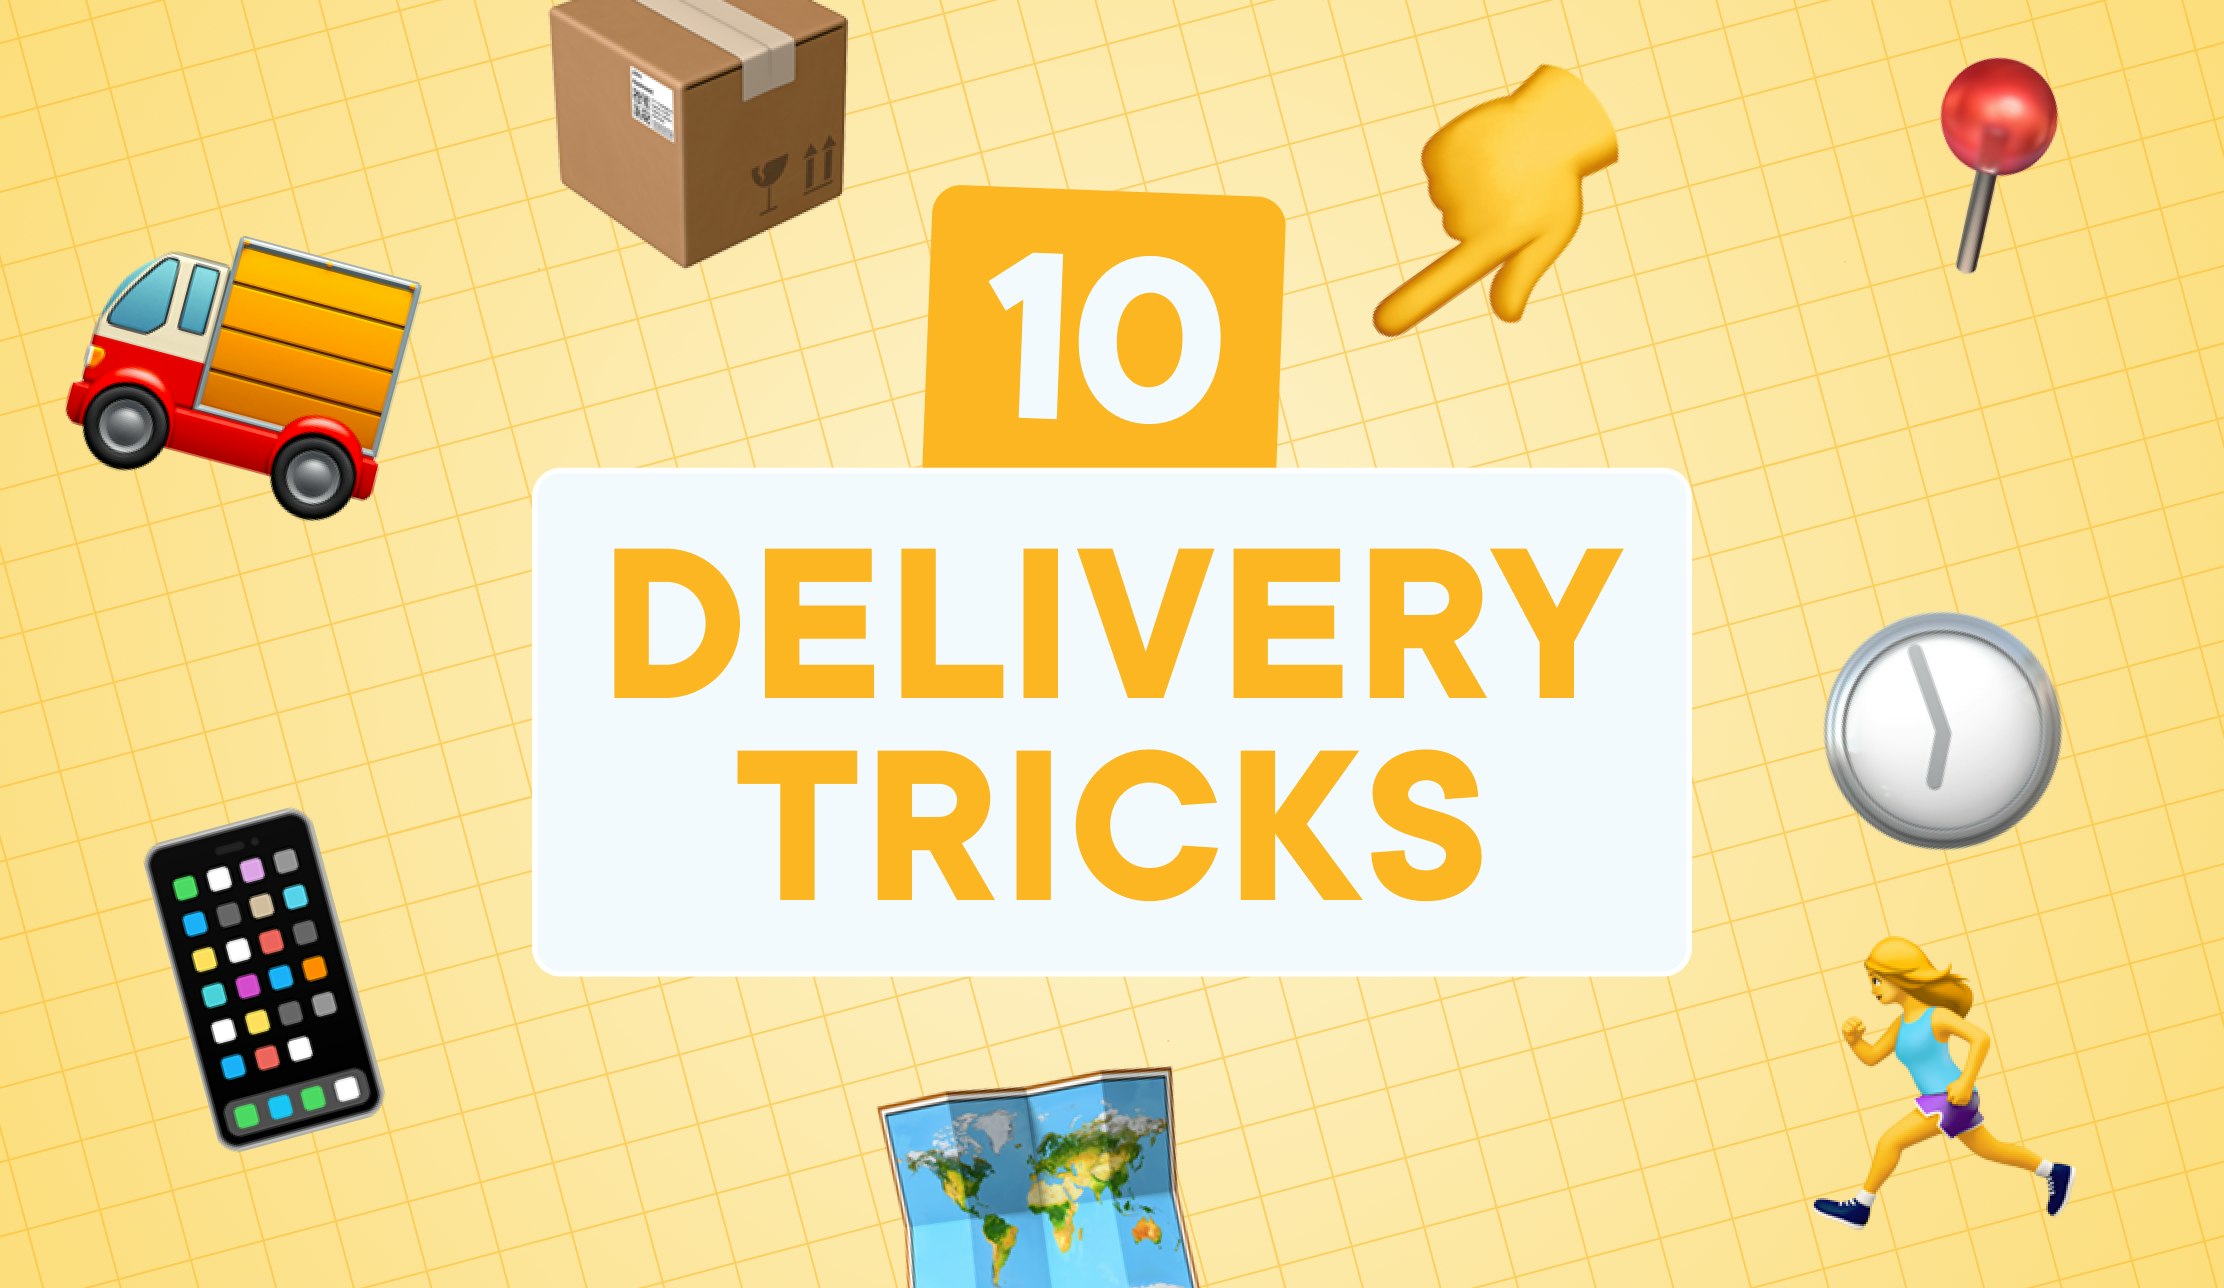 10 delivery tricks